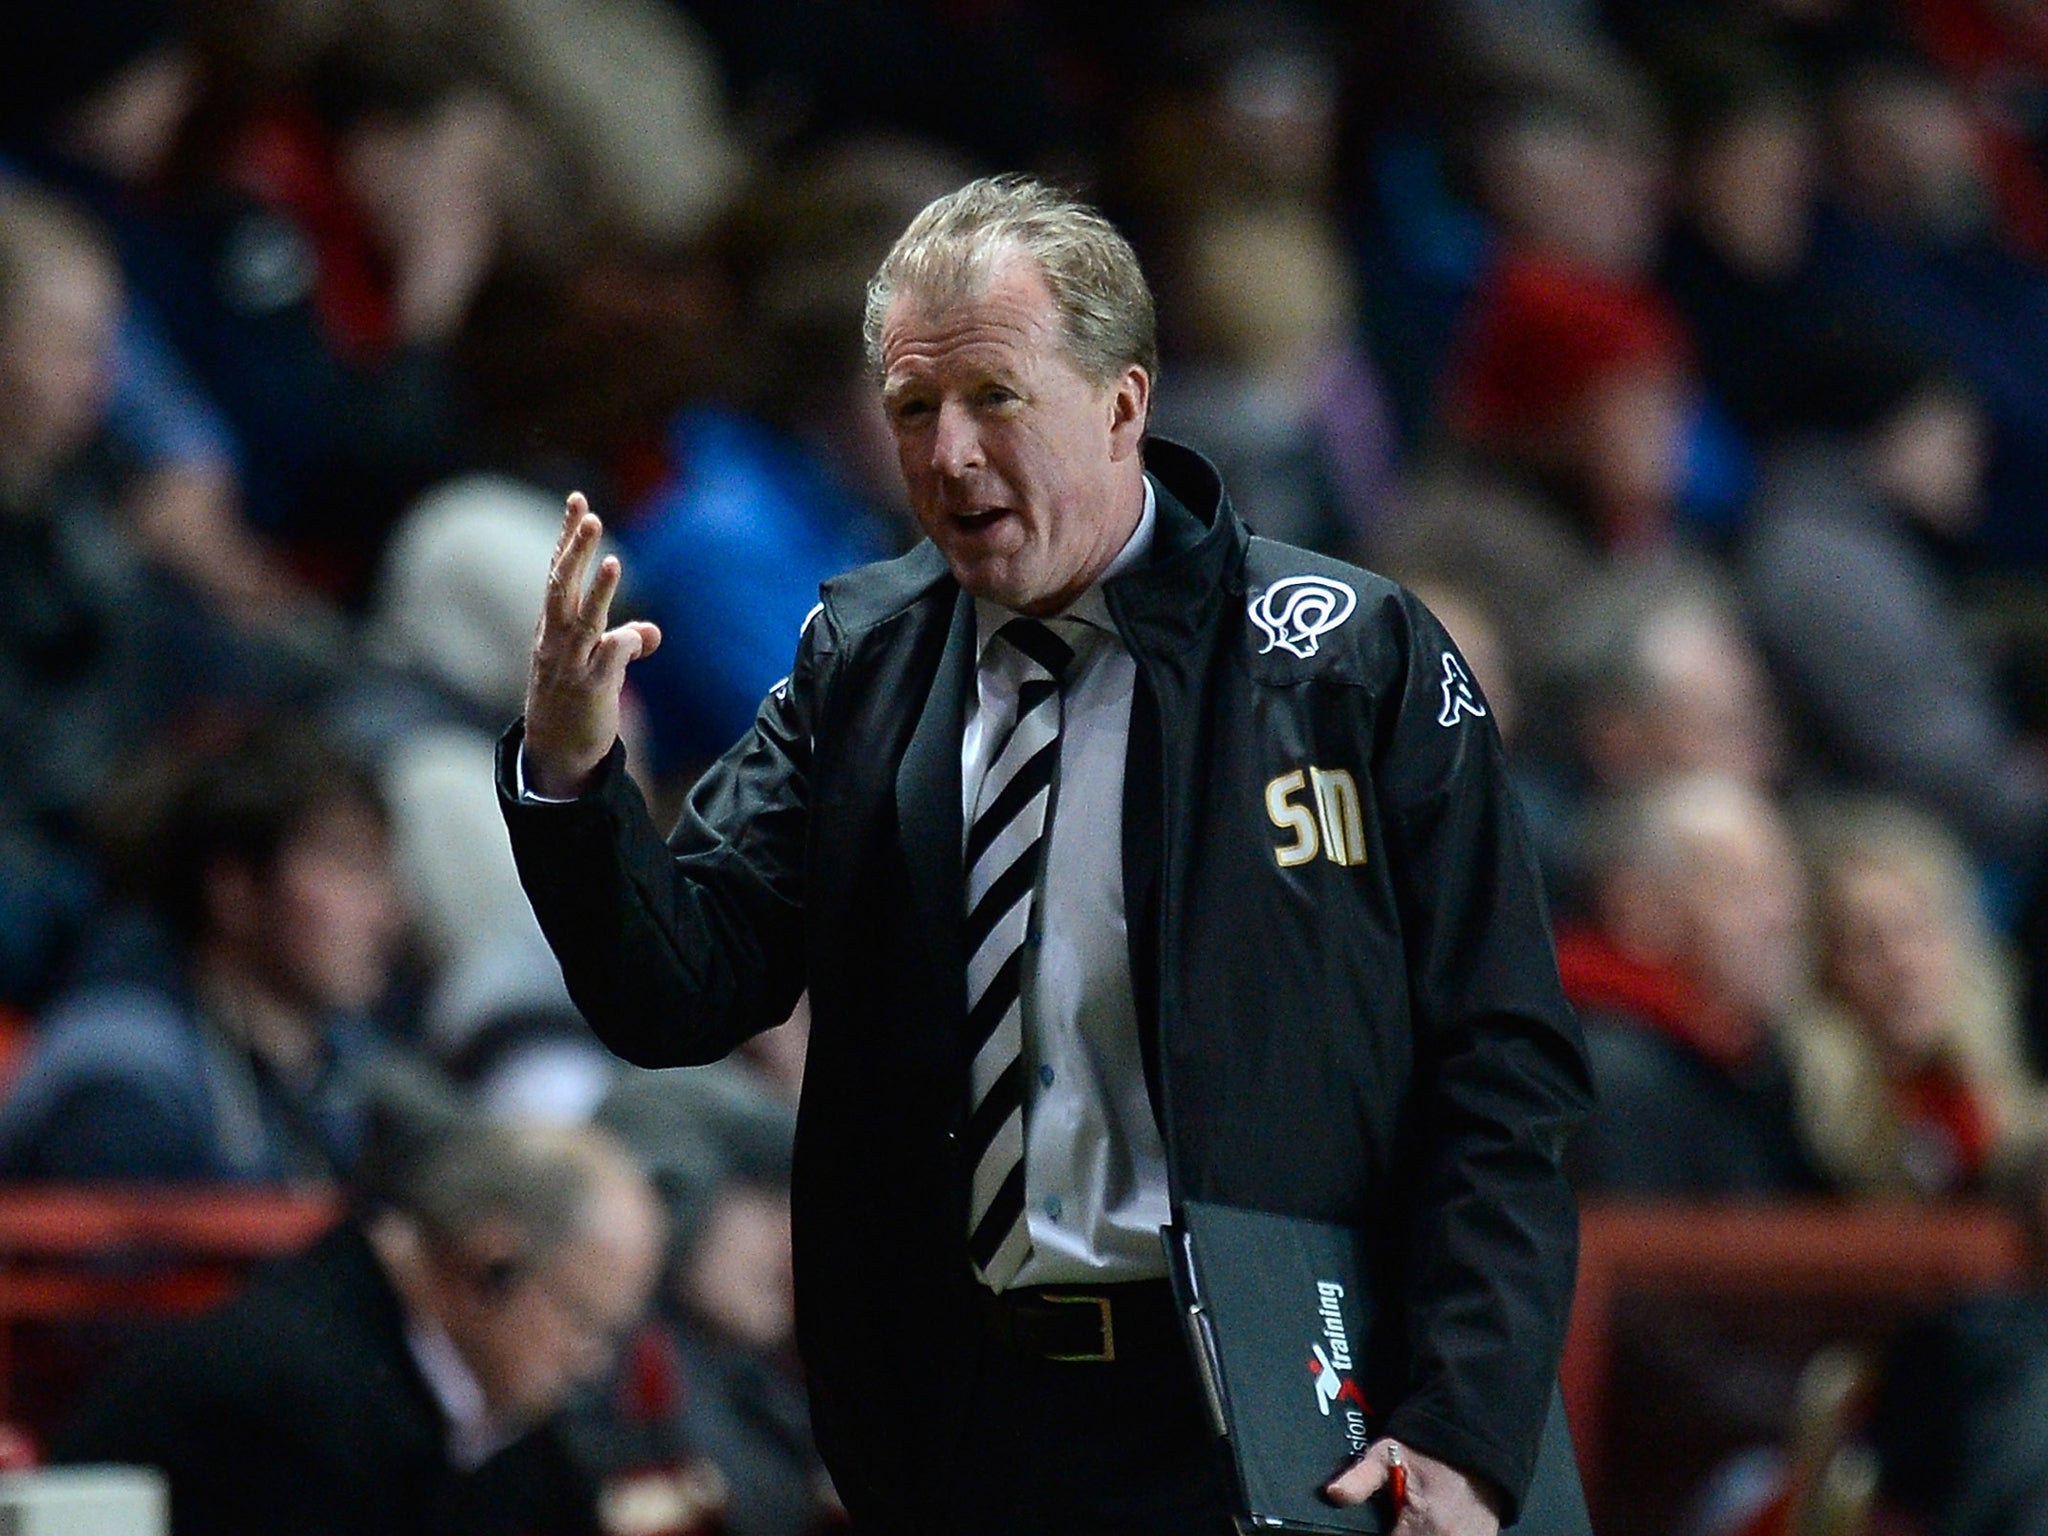 Steve McClaren has guided Derby County to seven straight wins